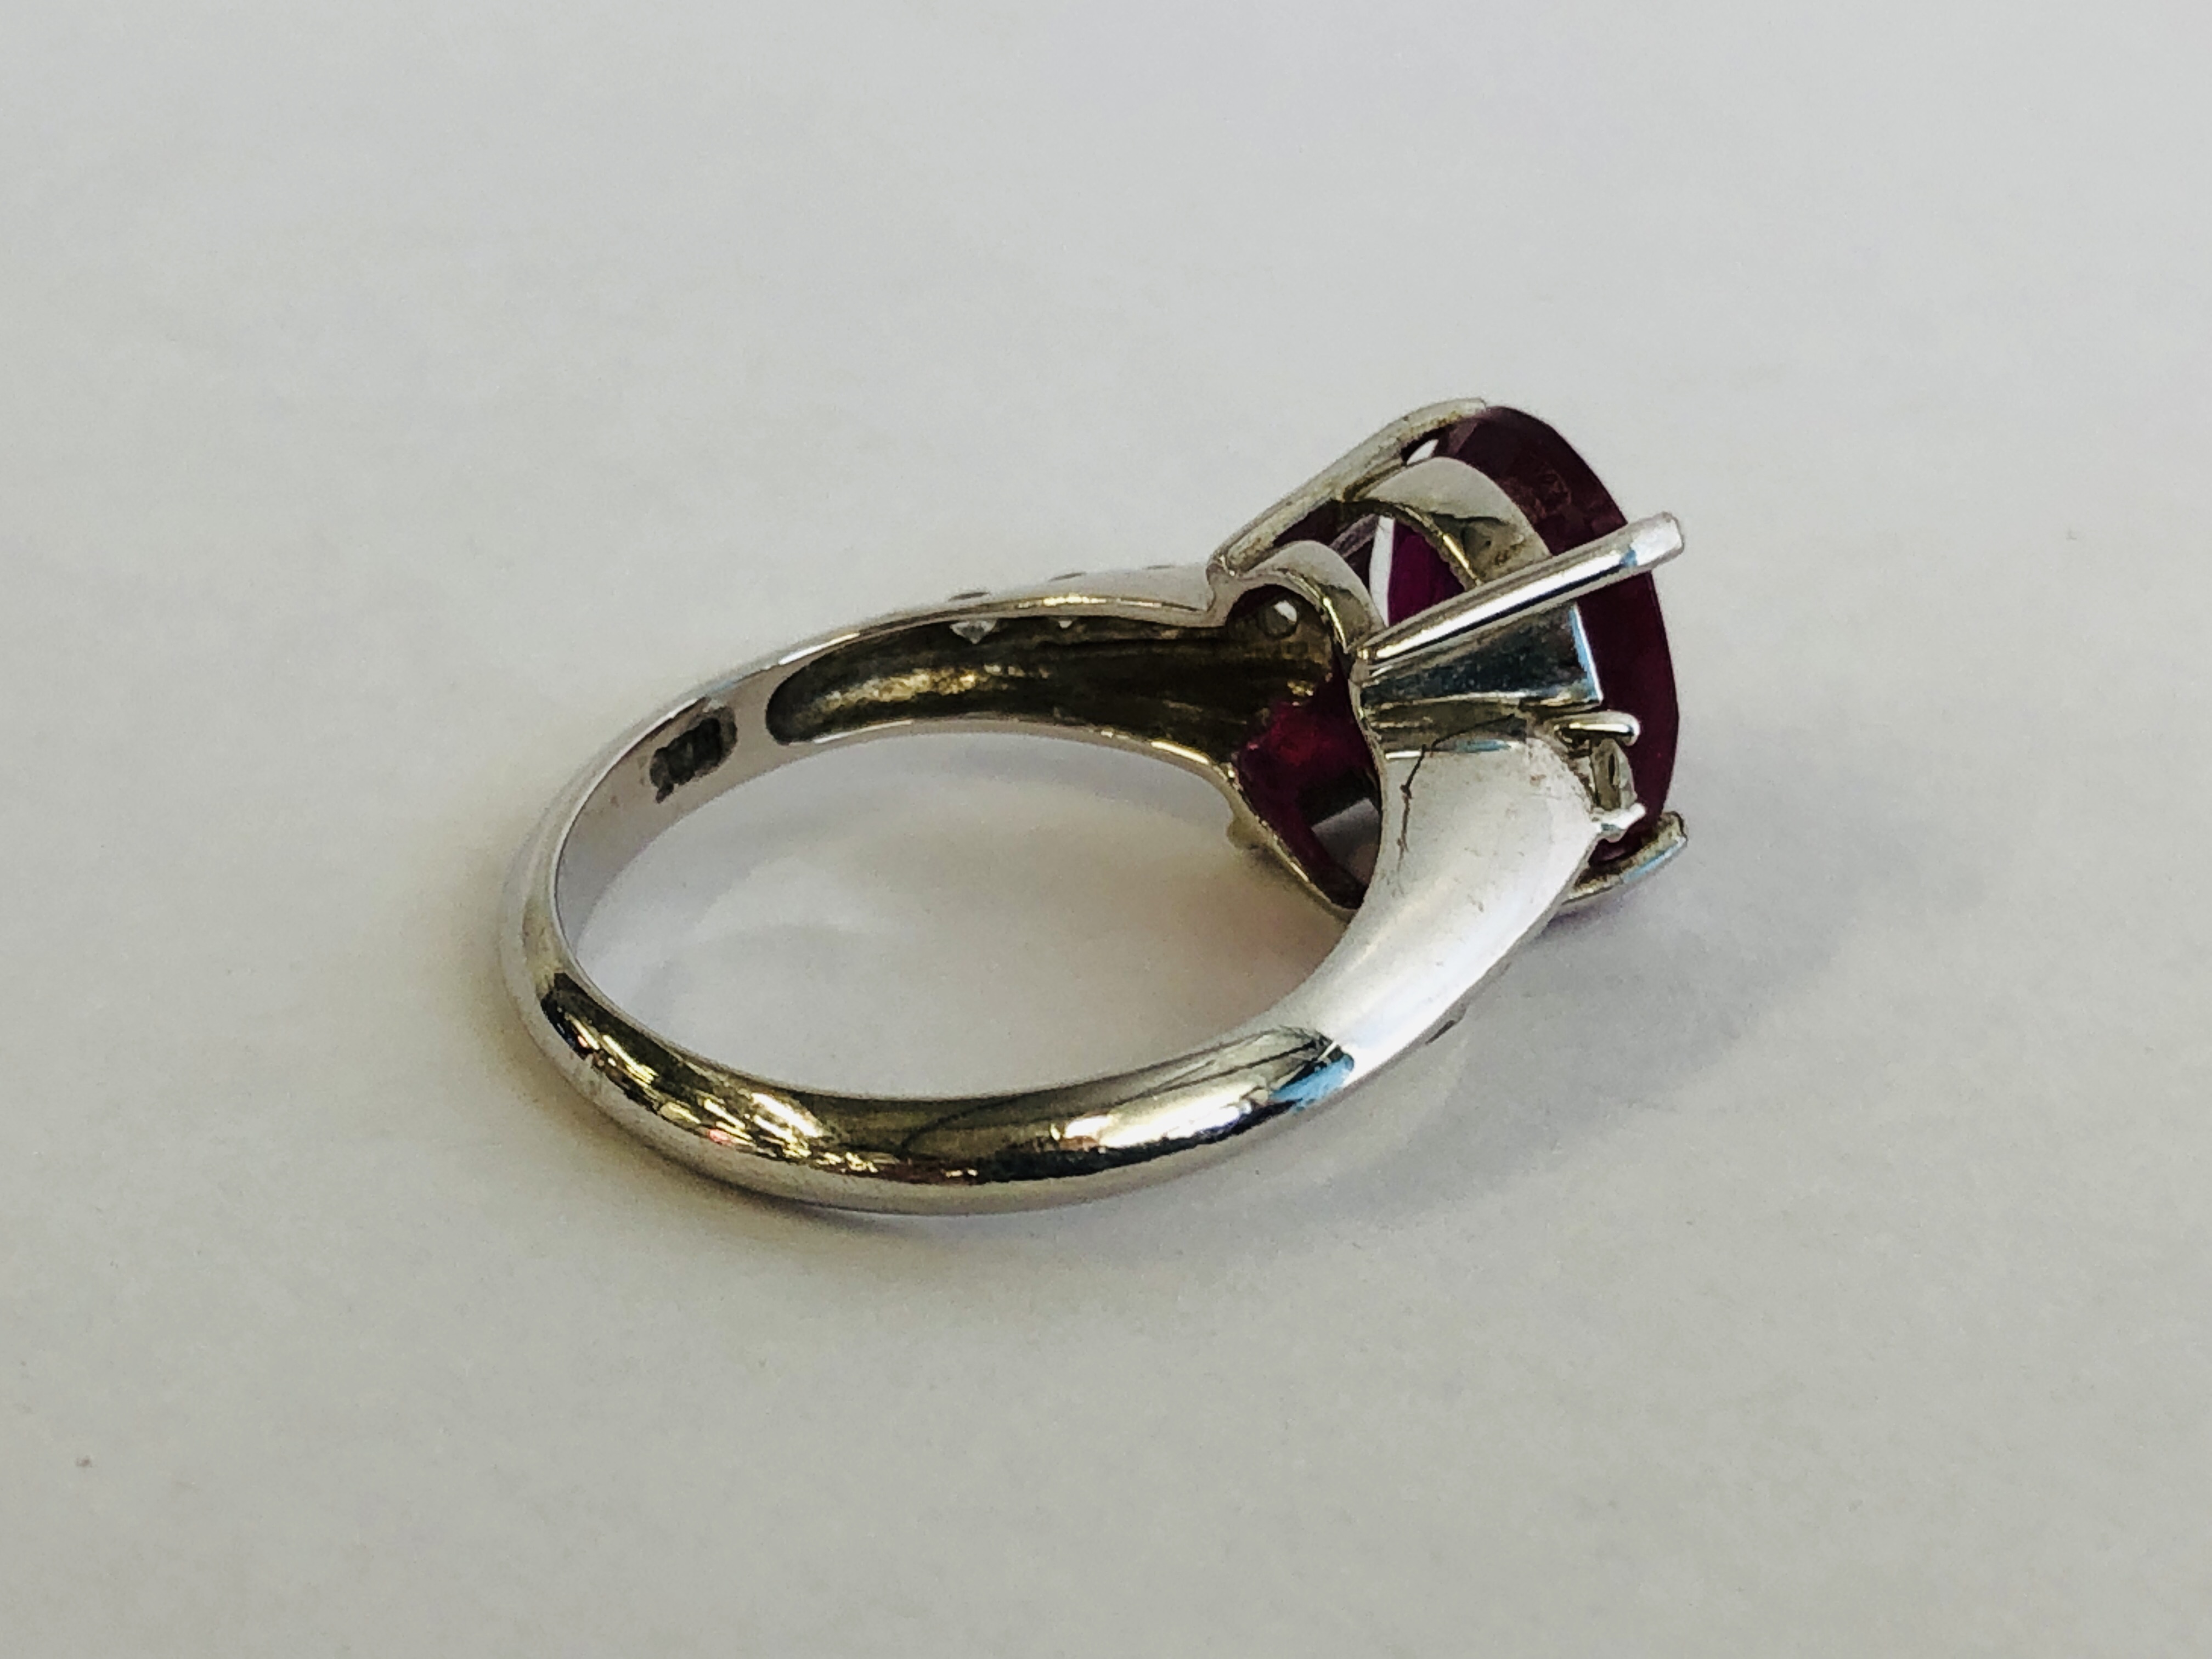 2 X DESIGNER SILVER RINGS, GREEN STONES IN A LOZENGE DESIGN AND CLAW SET DEEP PINK STONE. - Image 12 of 16